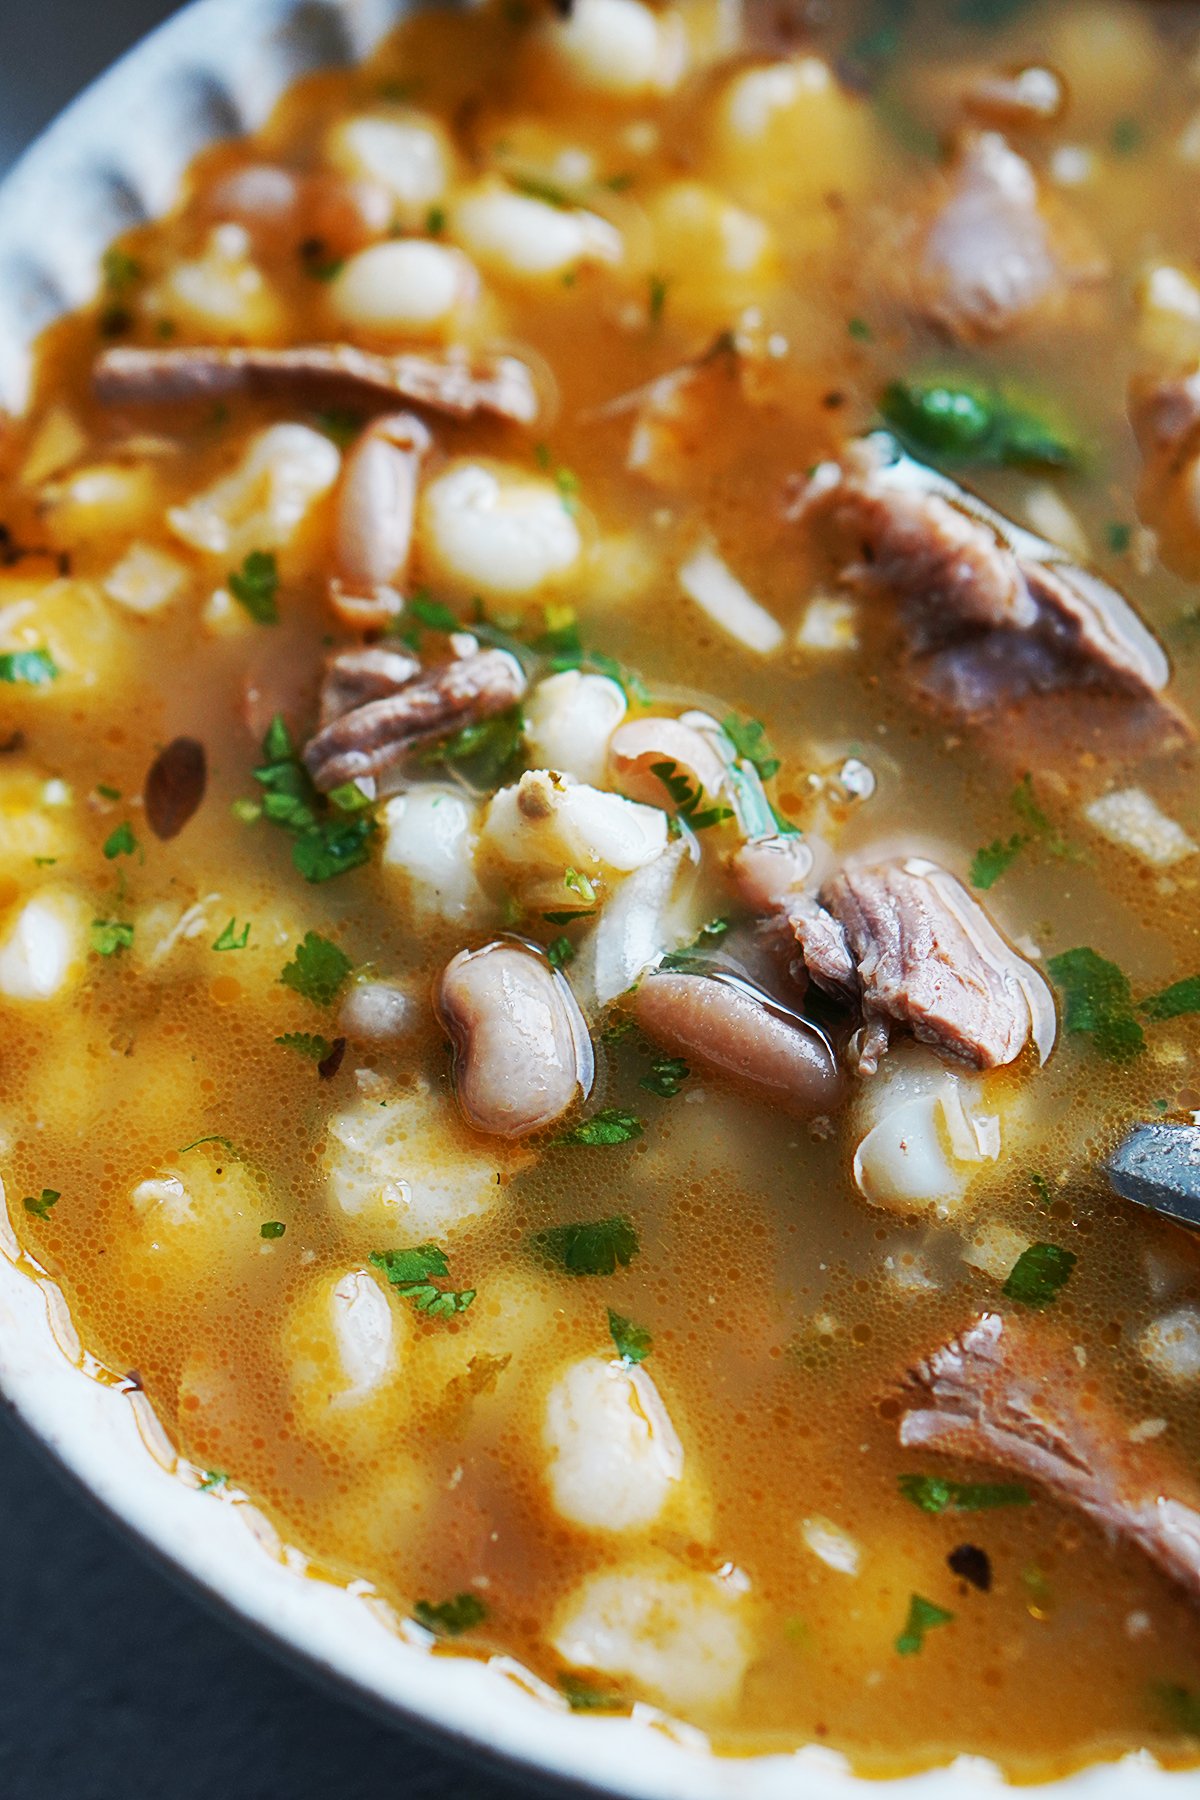 Close up image of gallina pinta soup showing beef, hominy and beans